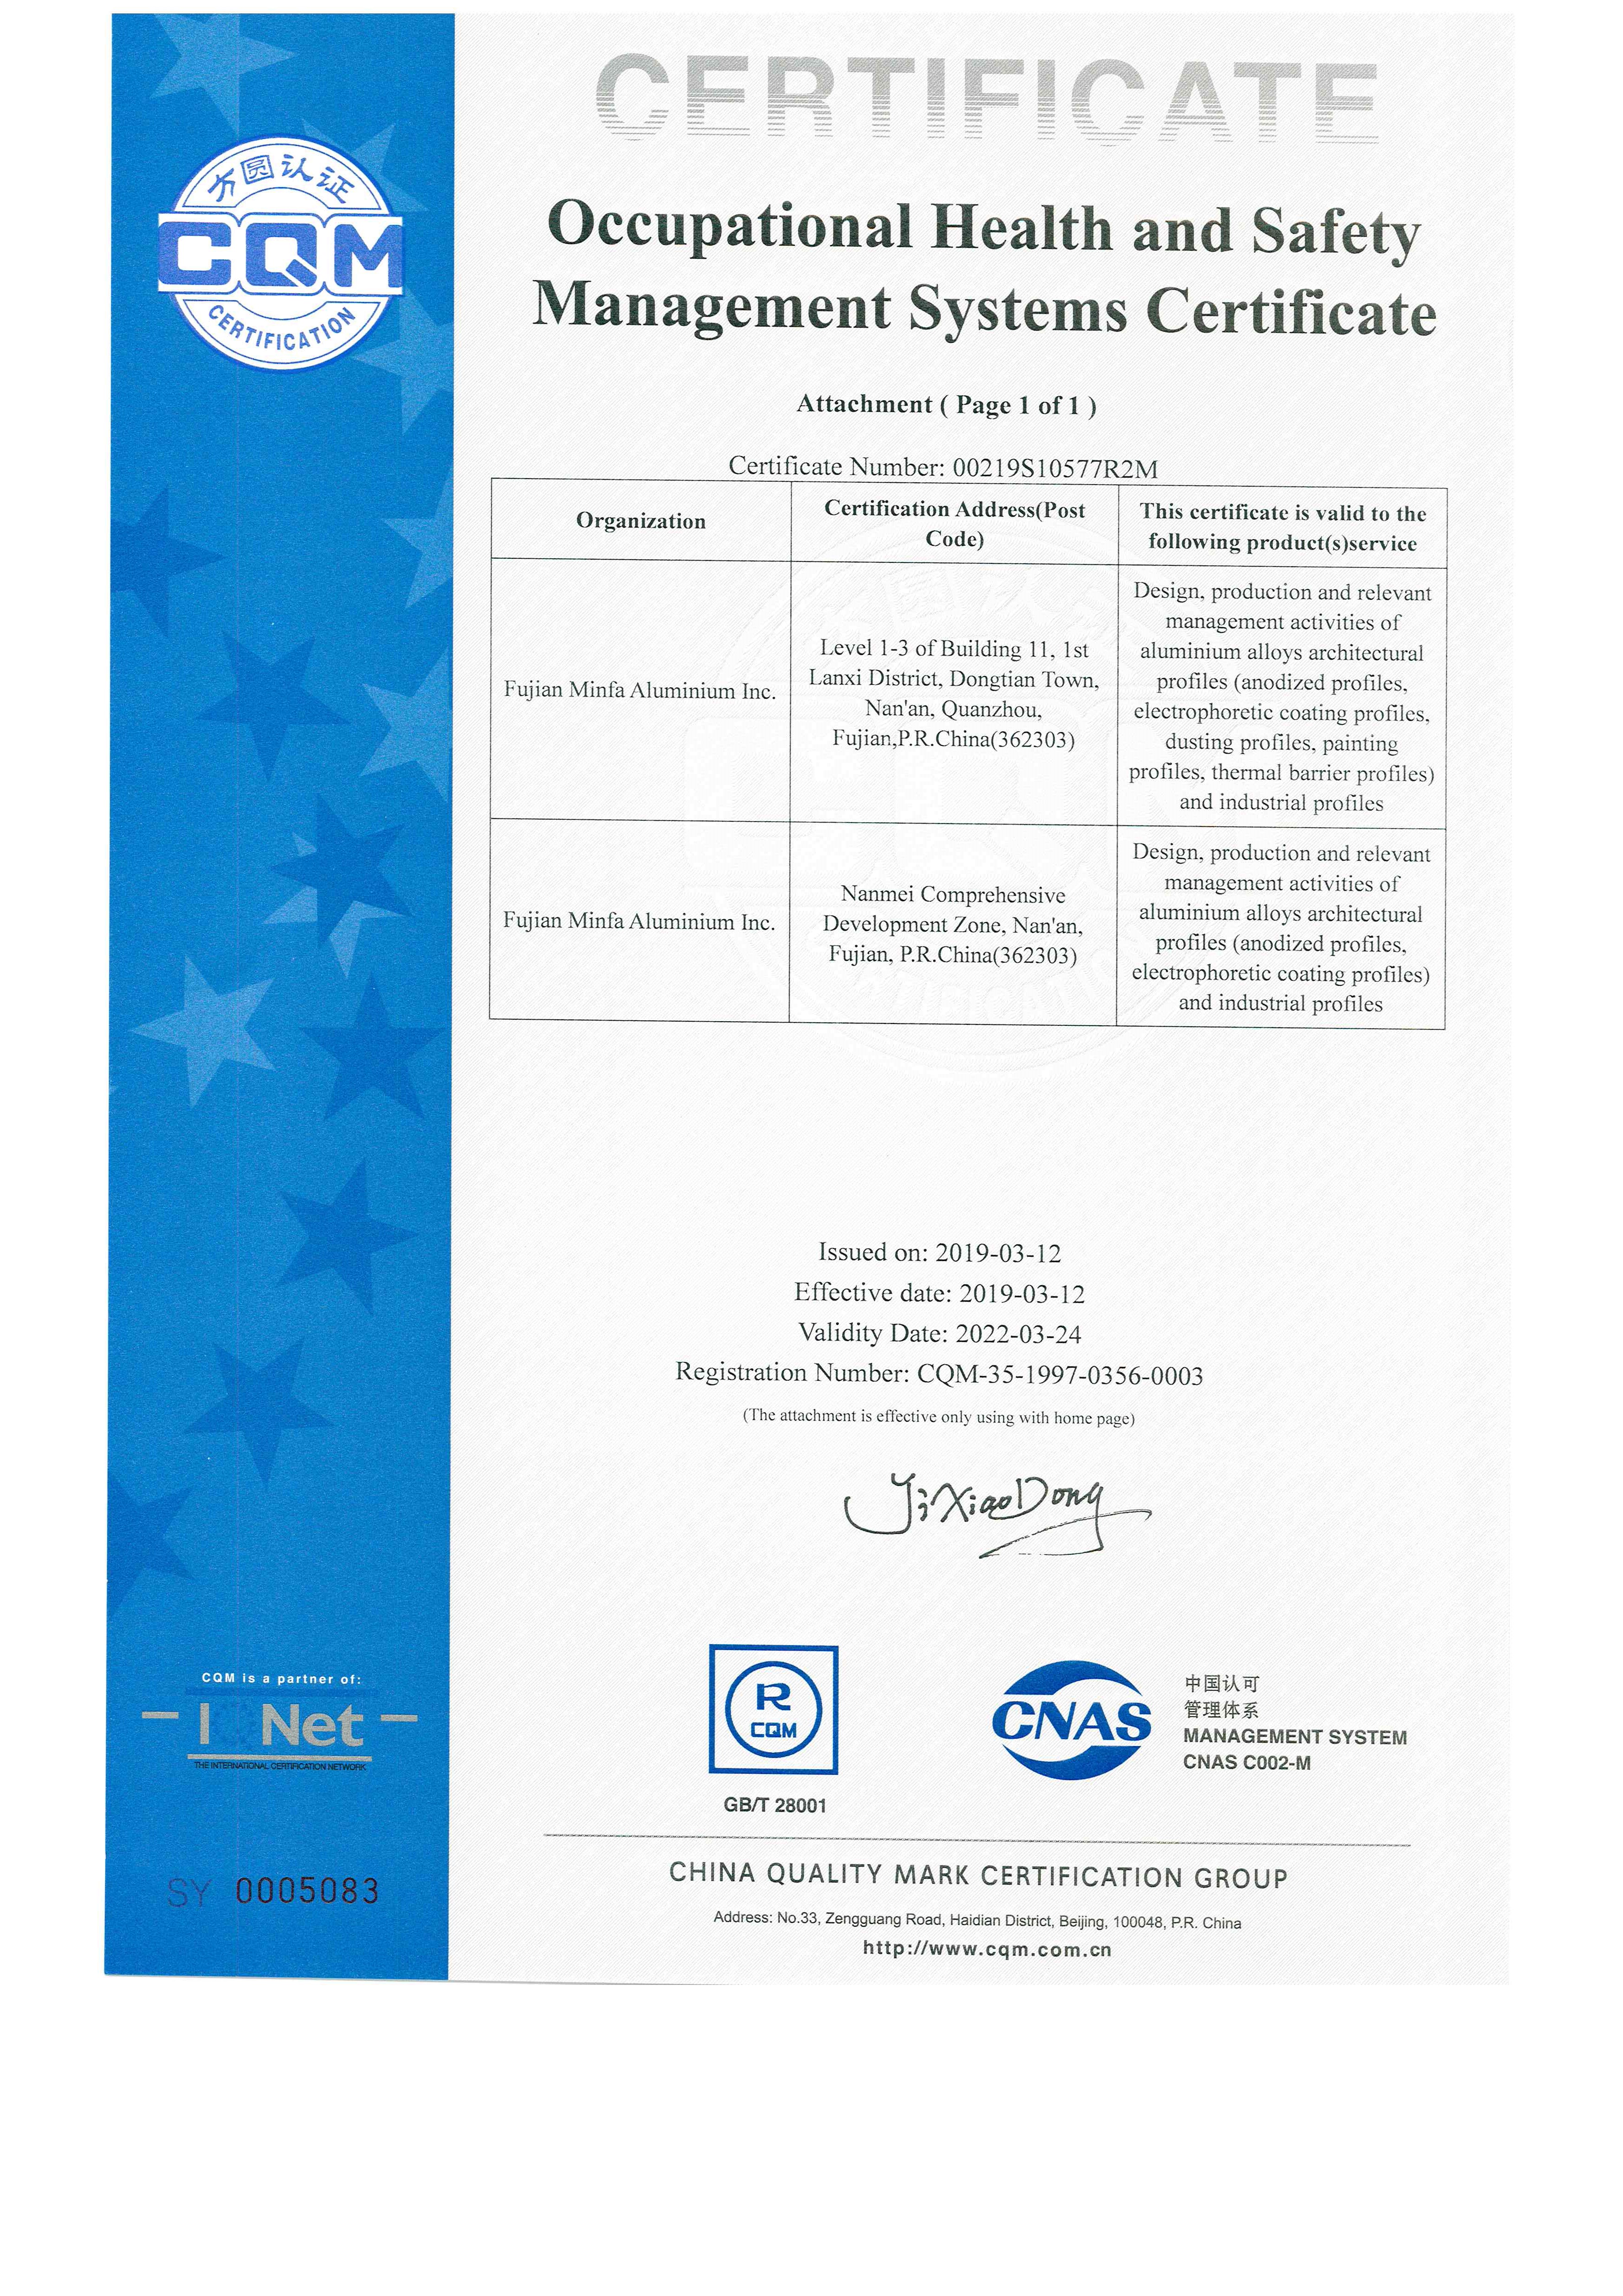 Occupational Health and Safety Management Systems Certificate 2.jpg